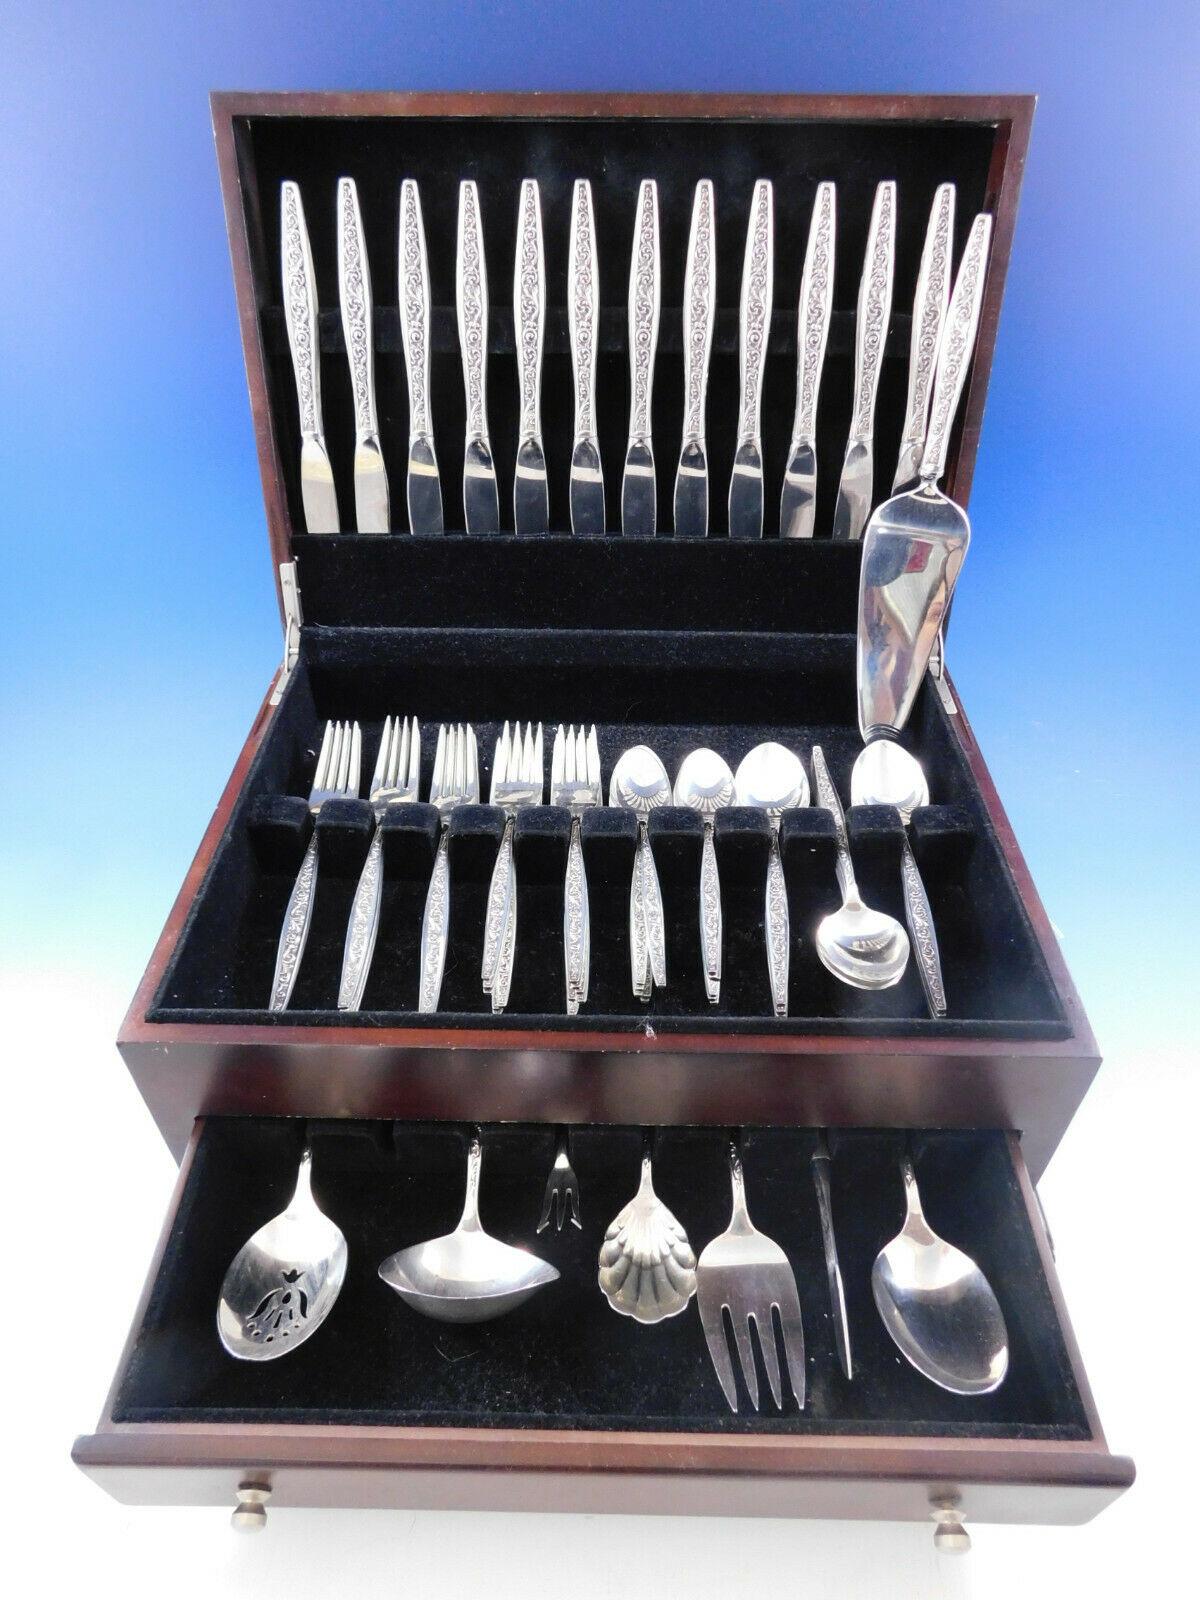 Renaissance Scroll by Reed and Barton, circa 1969 Sterling Silver Flatware set - 68 pieces. This set includes:

12 Knives, 9 1/8